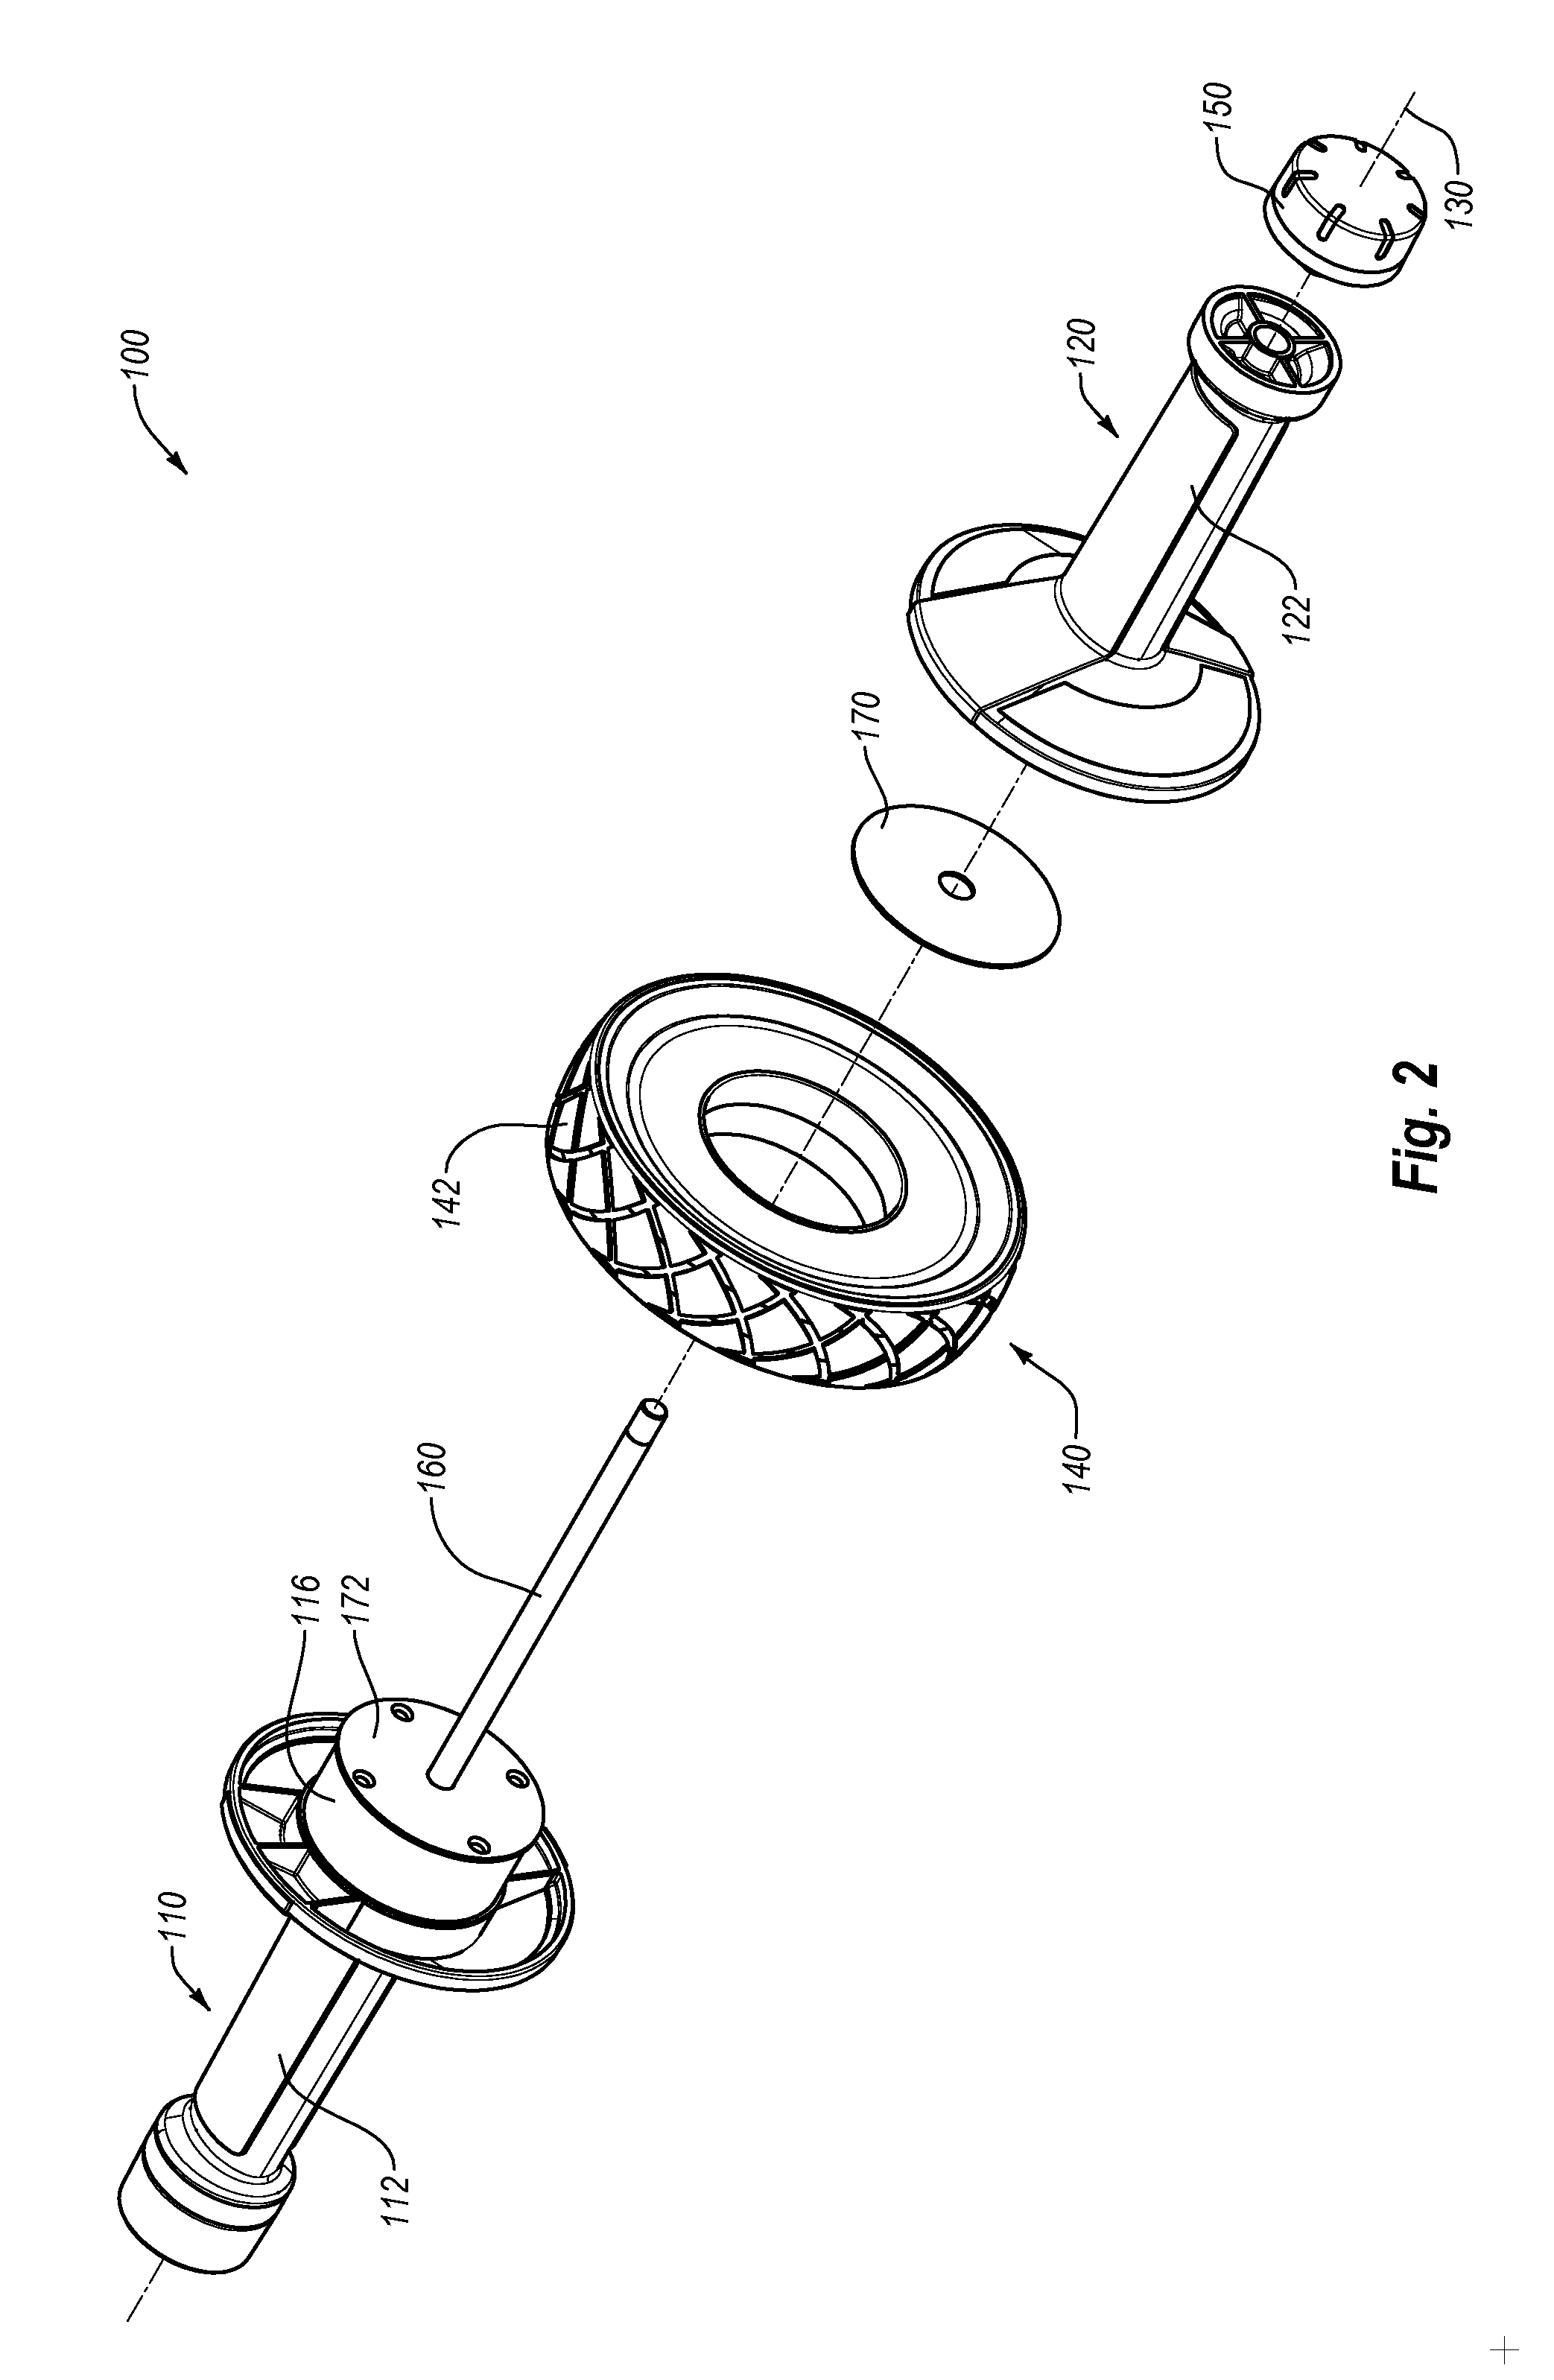 Hand-held combination exercise device